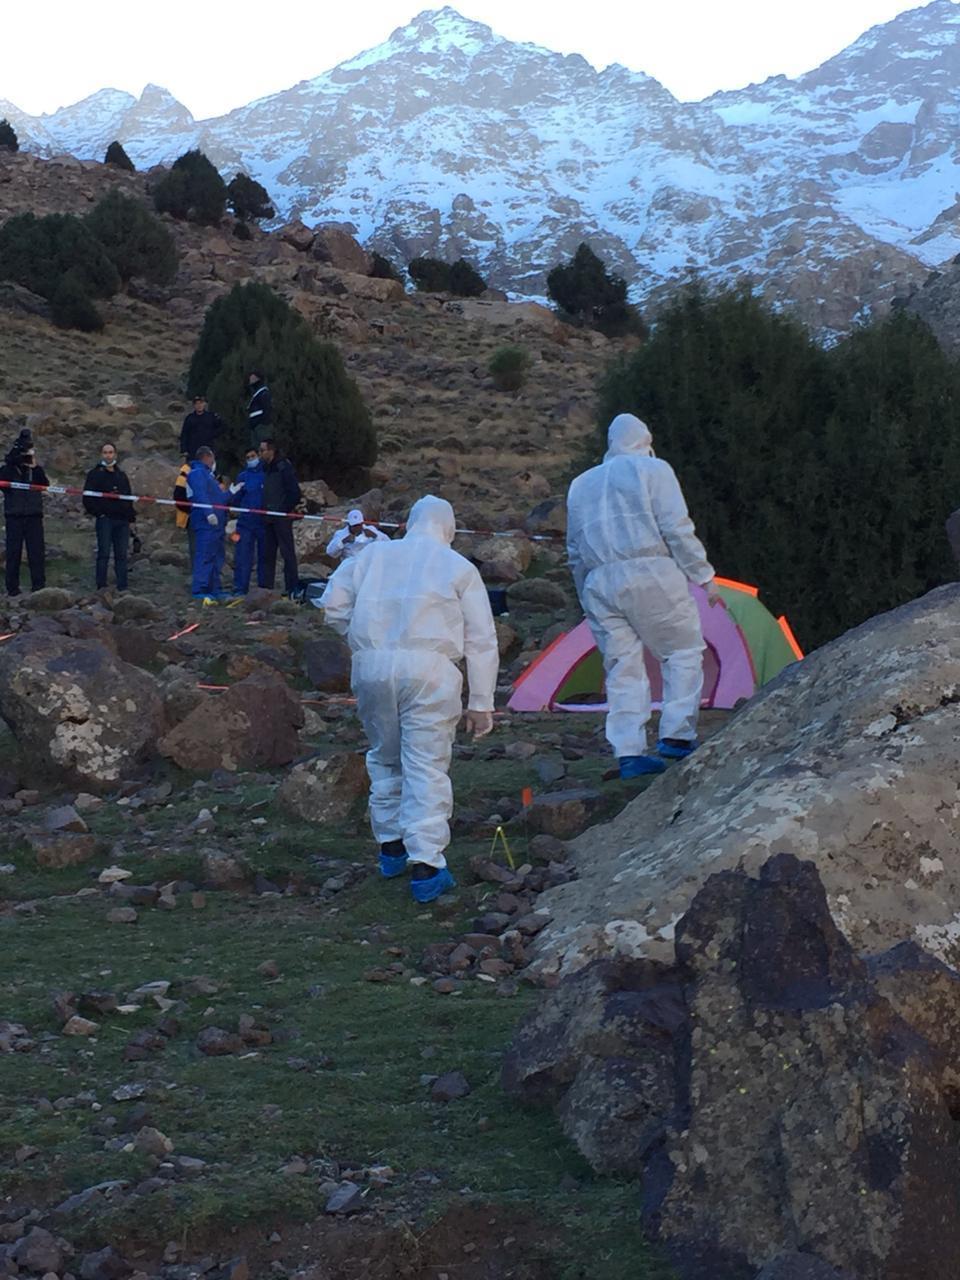 A forensic team in the area where the bodies of two Scandinavian women tourists were found near Imlil in the Atlas Mountains, Morocco